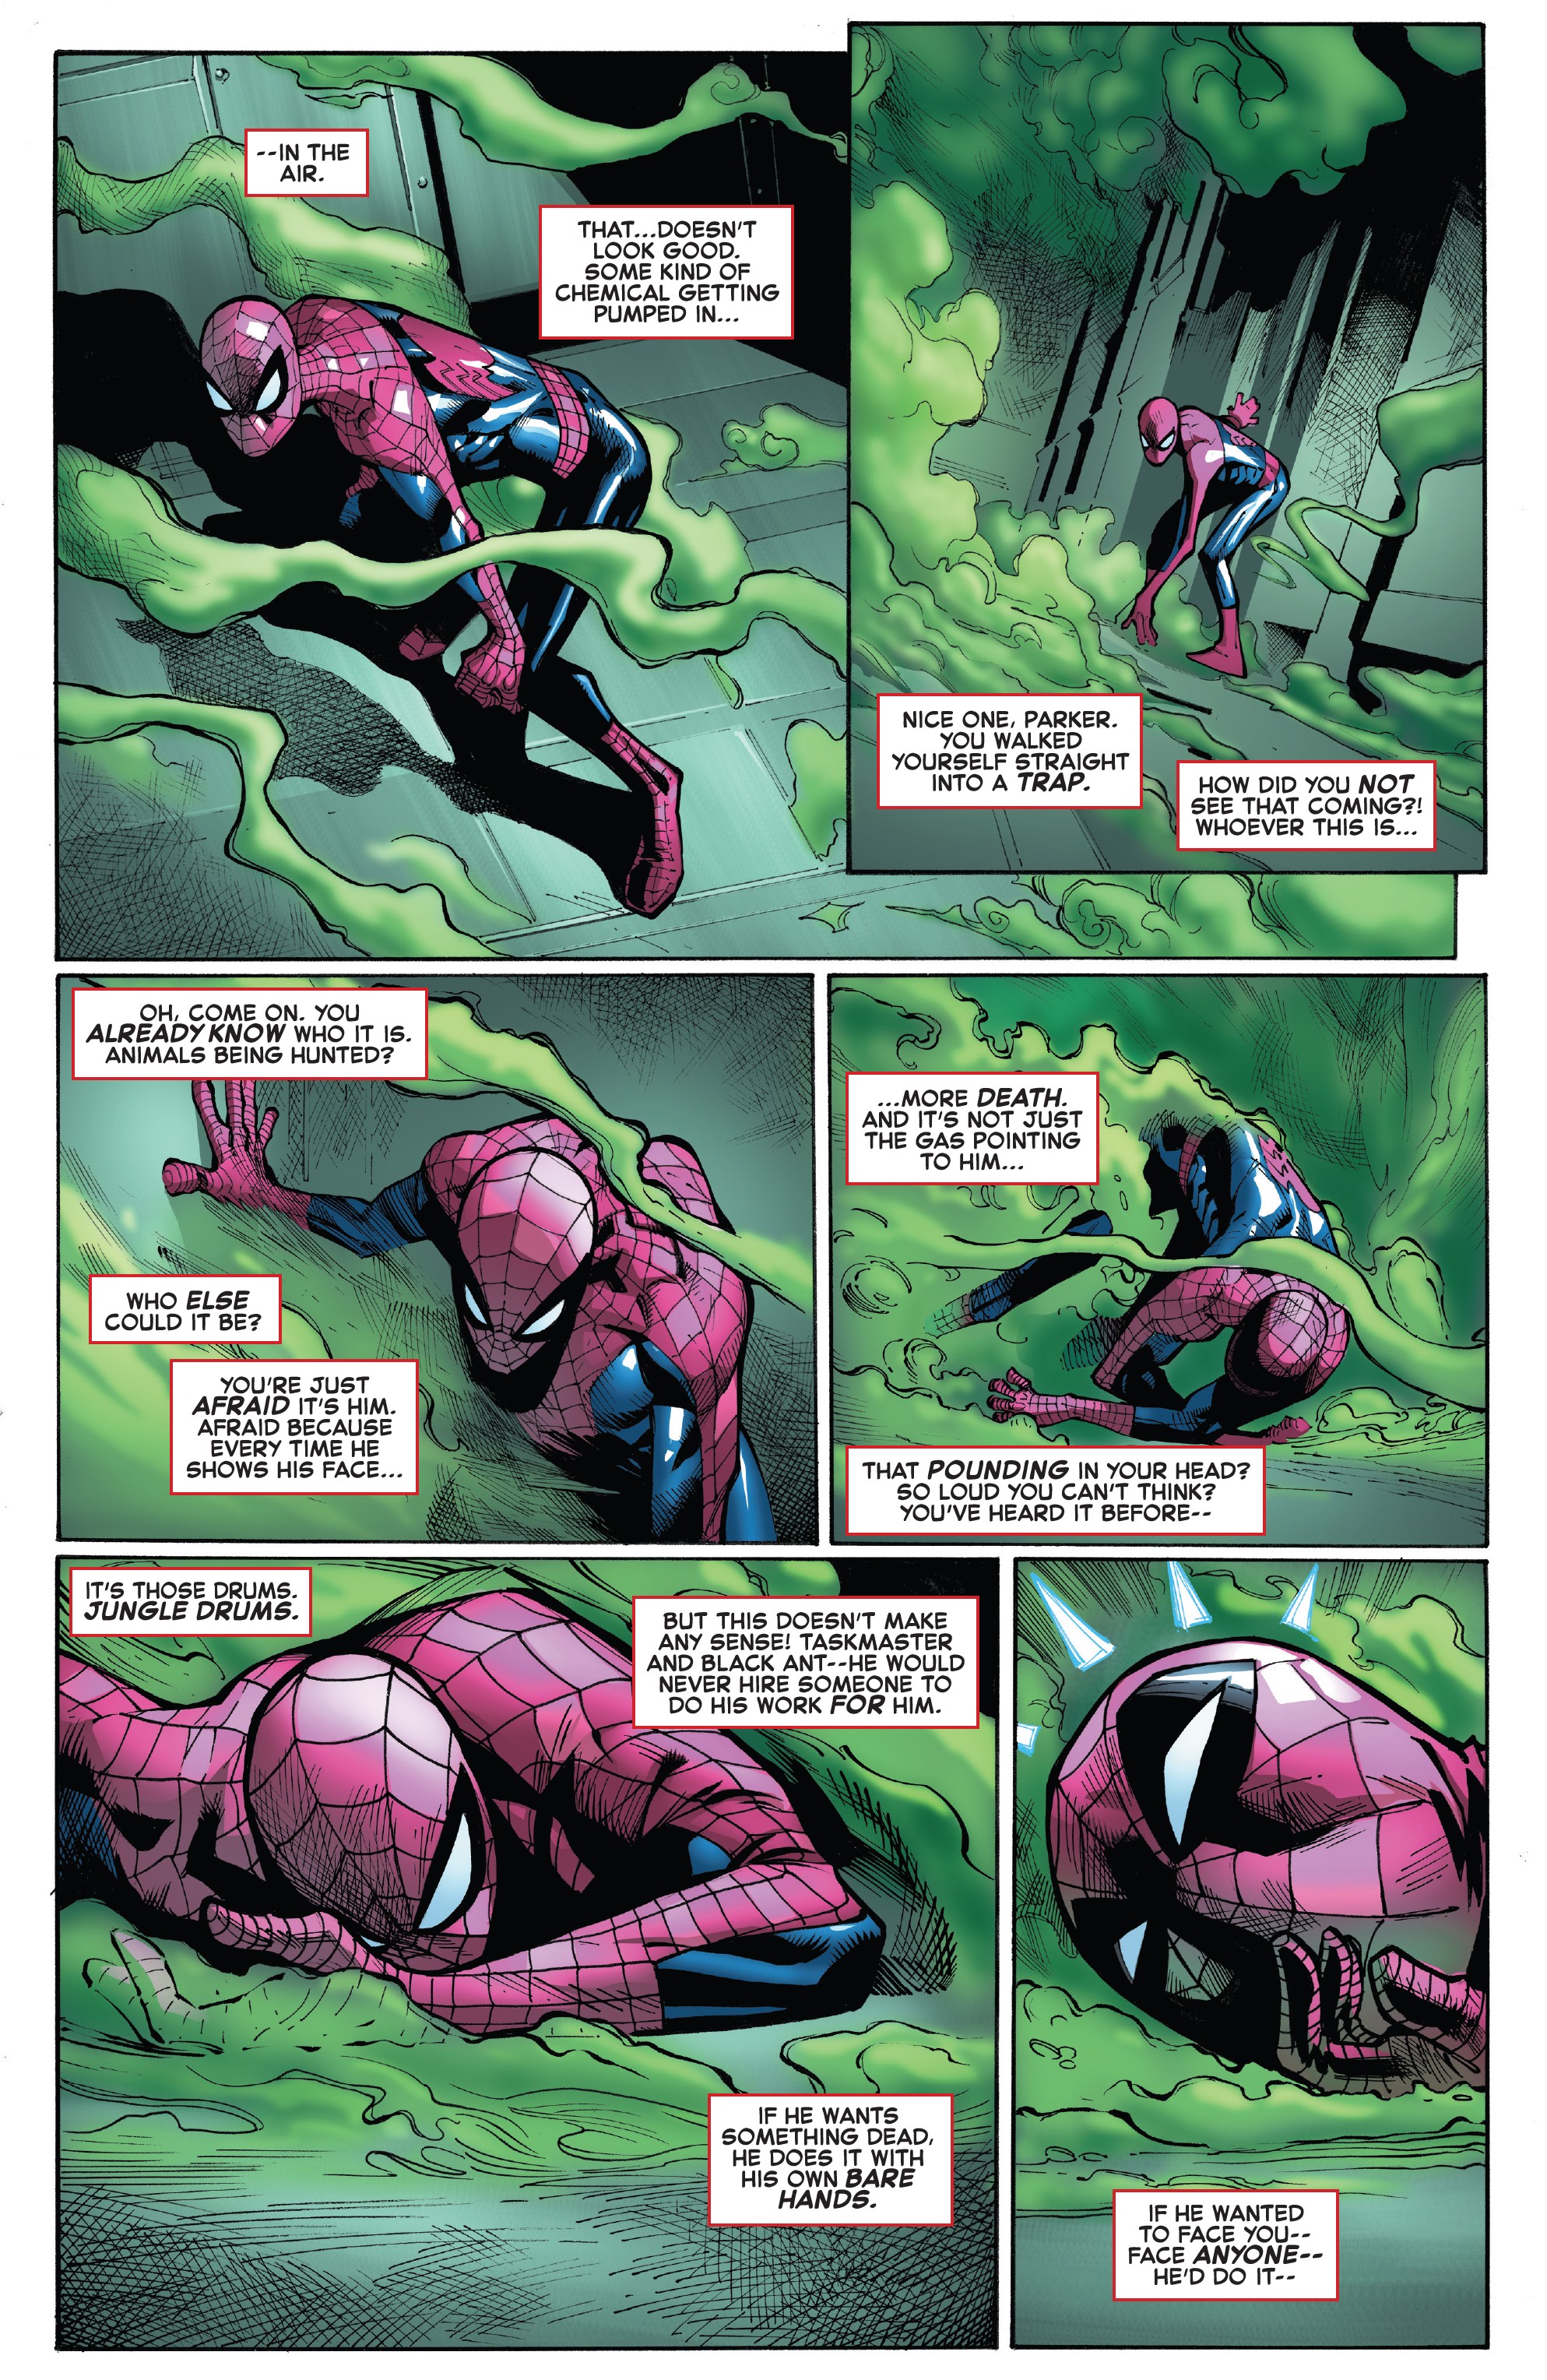 Amazing Spider Man 2018 Chapter 17 Page 19